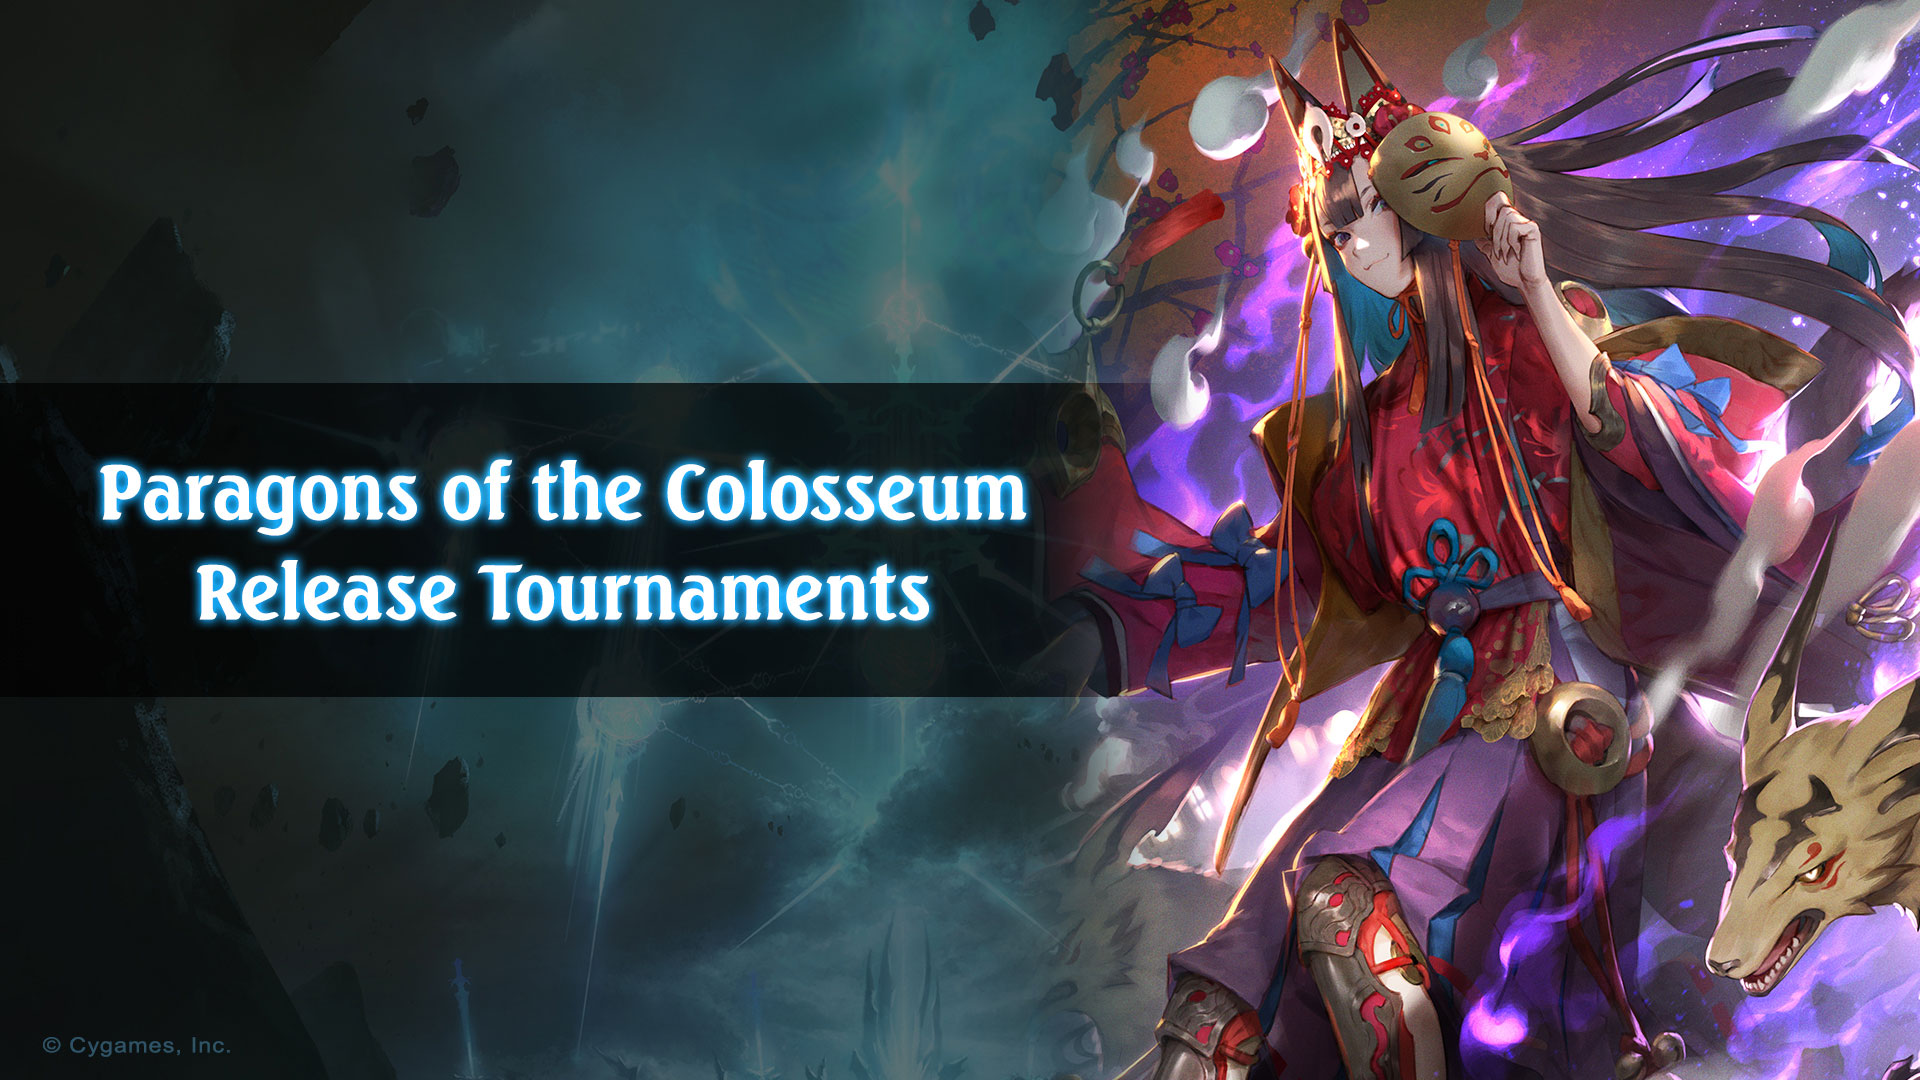 Paragon Of The Colosseum release tournaments